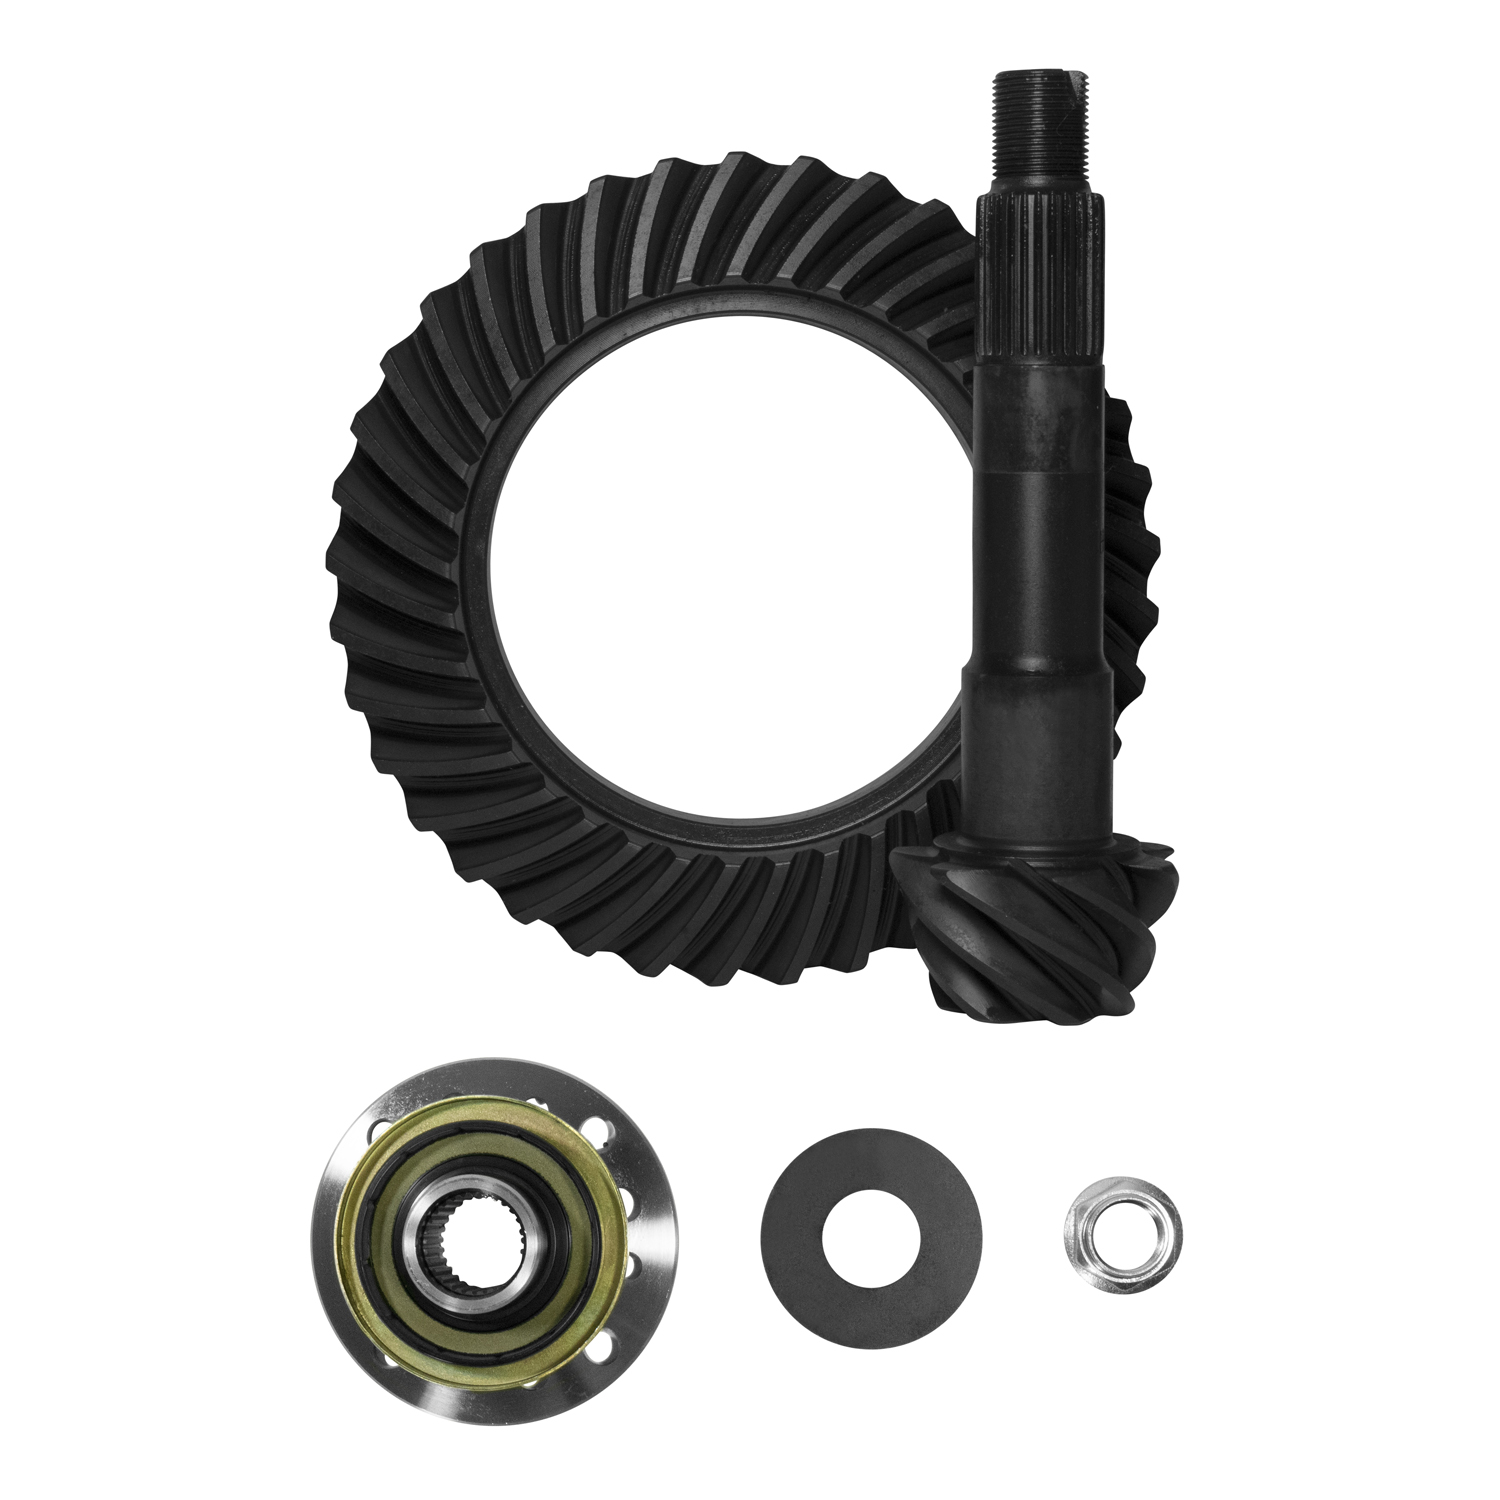 High Performance Yukon Ring And Pinion Gear Set For Toyota In A Ratio